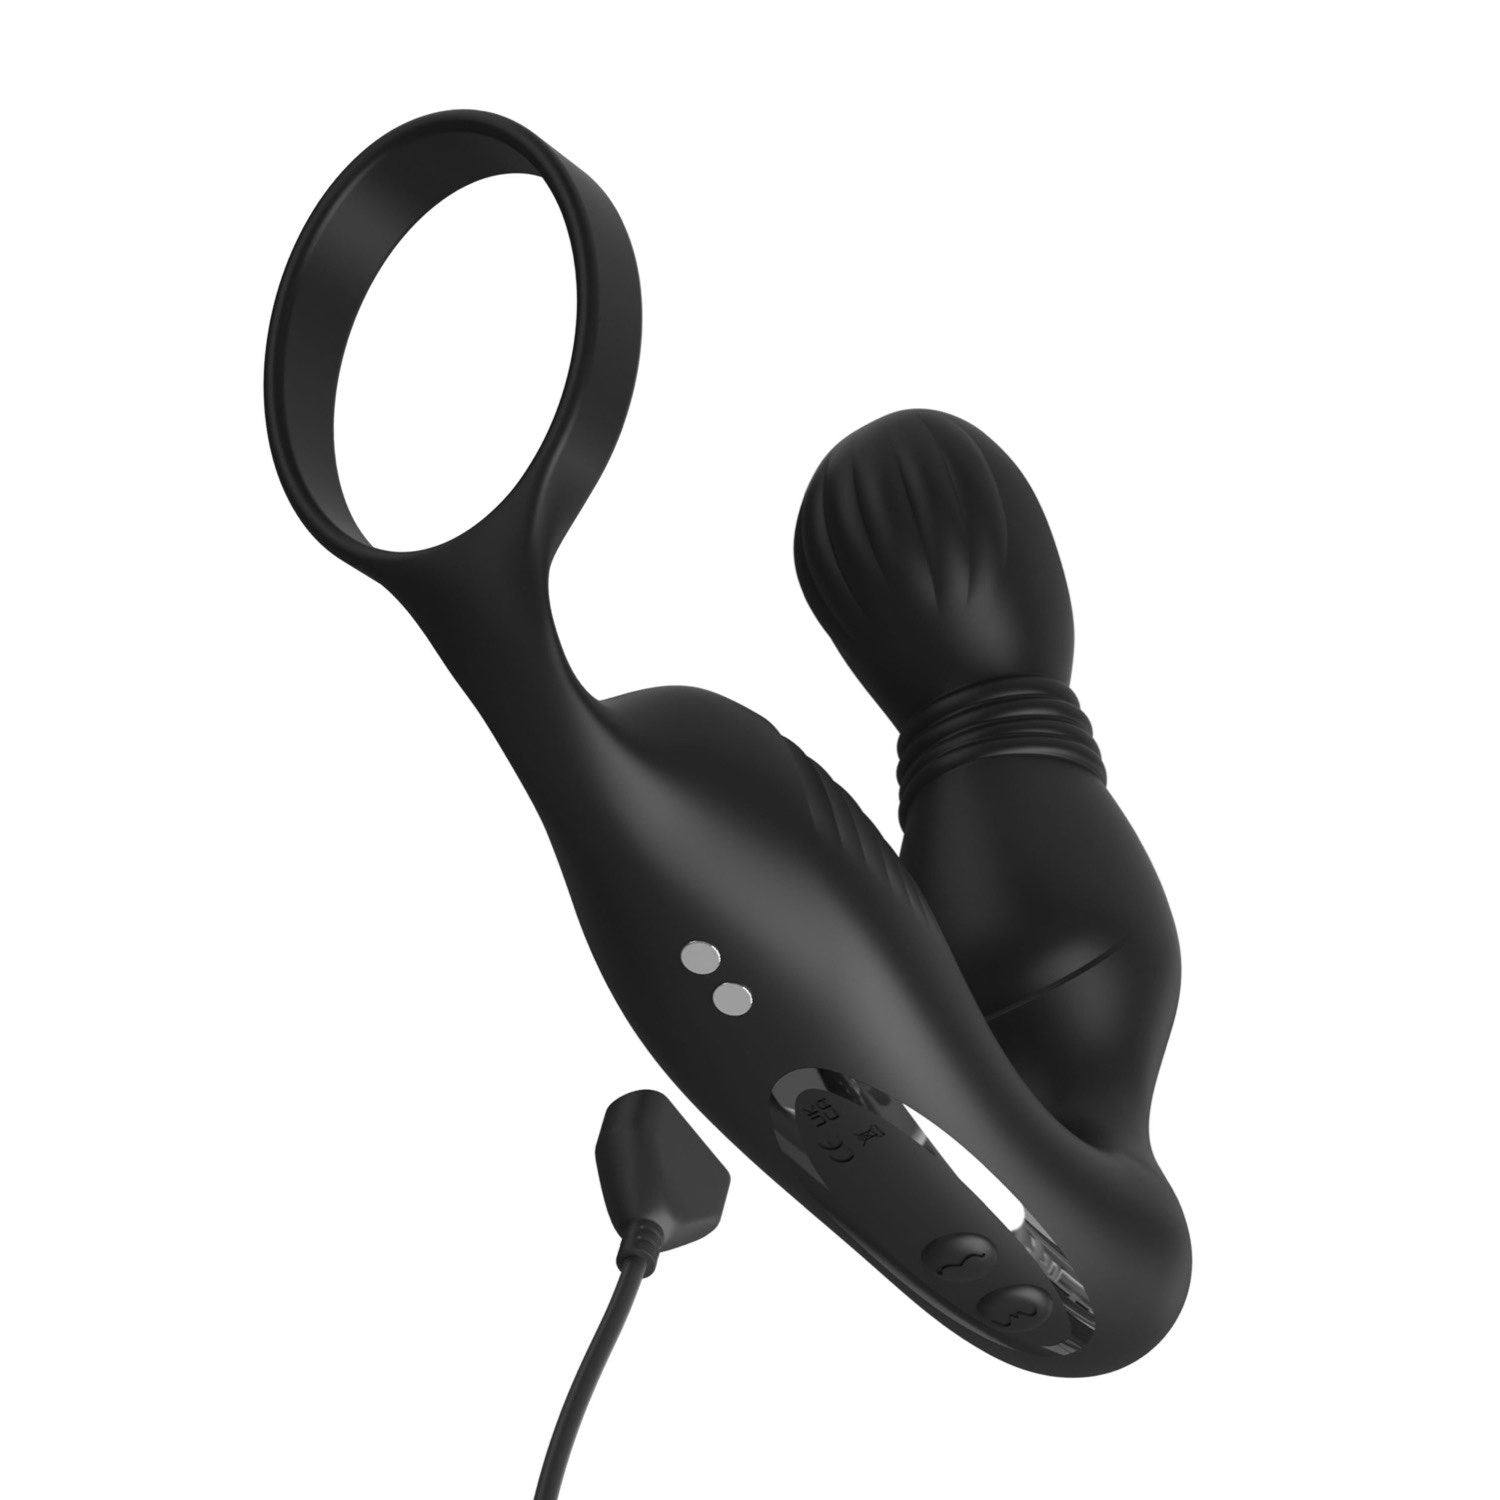 Anal Fantasy Elite Ass-Gasm P-Spot Milker - Black USB Rechargeable Prostate Massage with Cock Ring by Pipedream